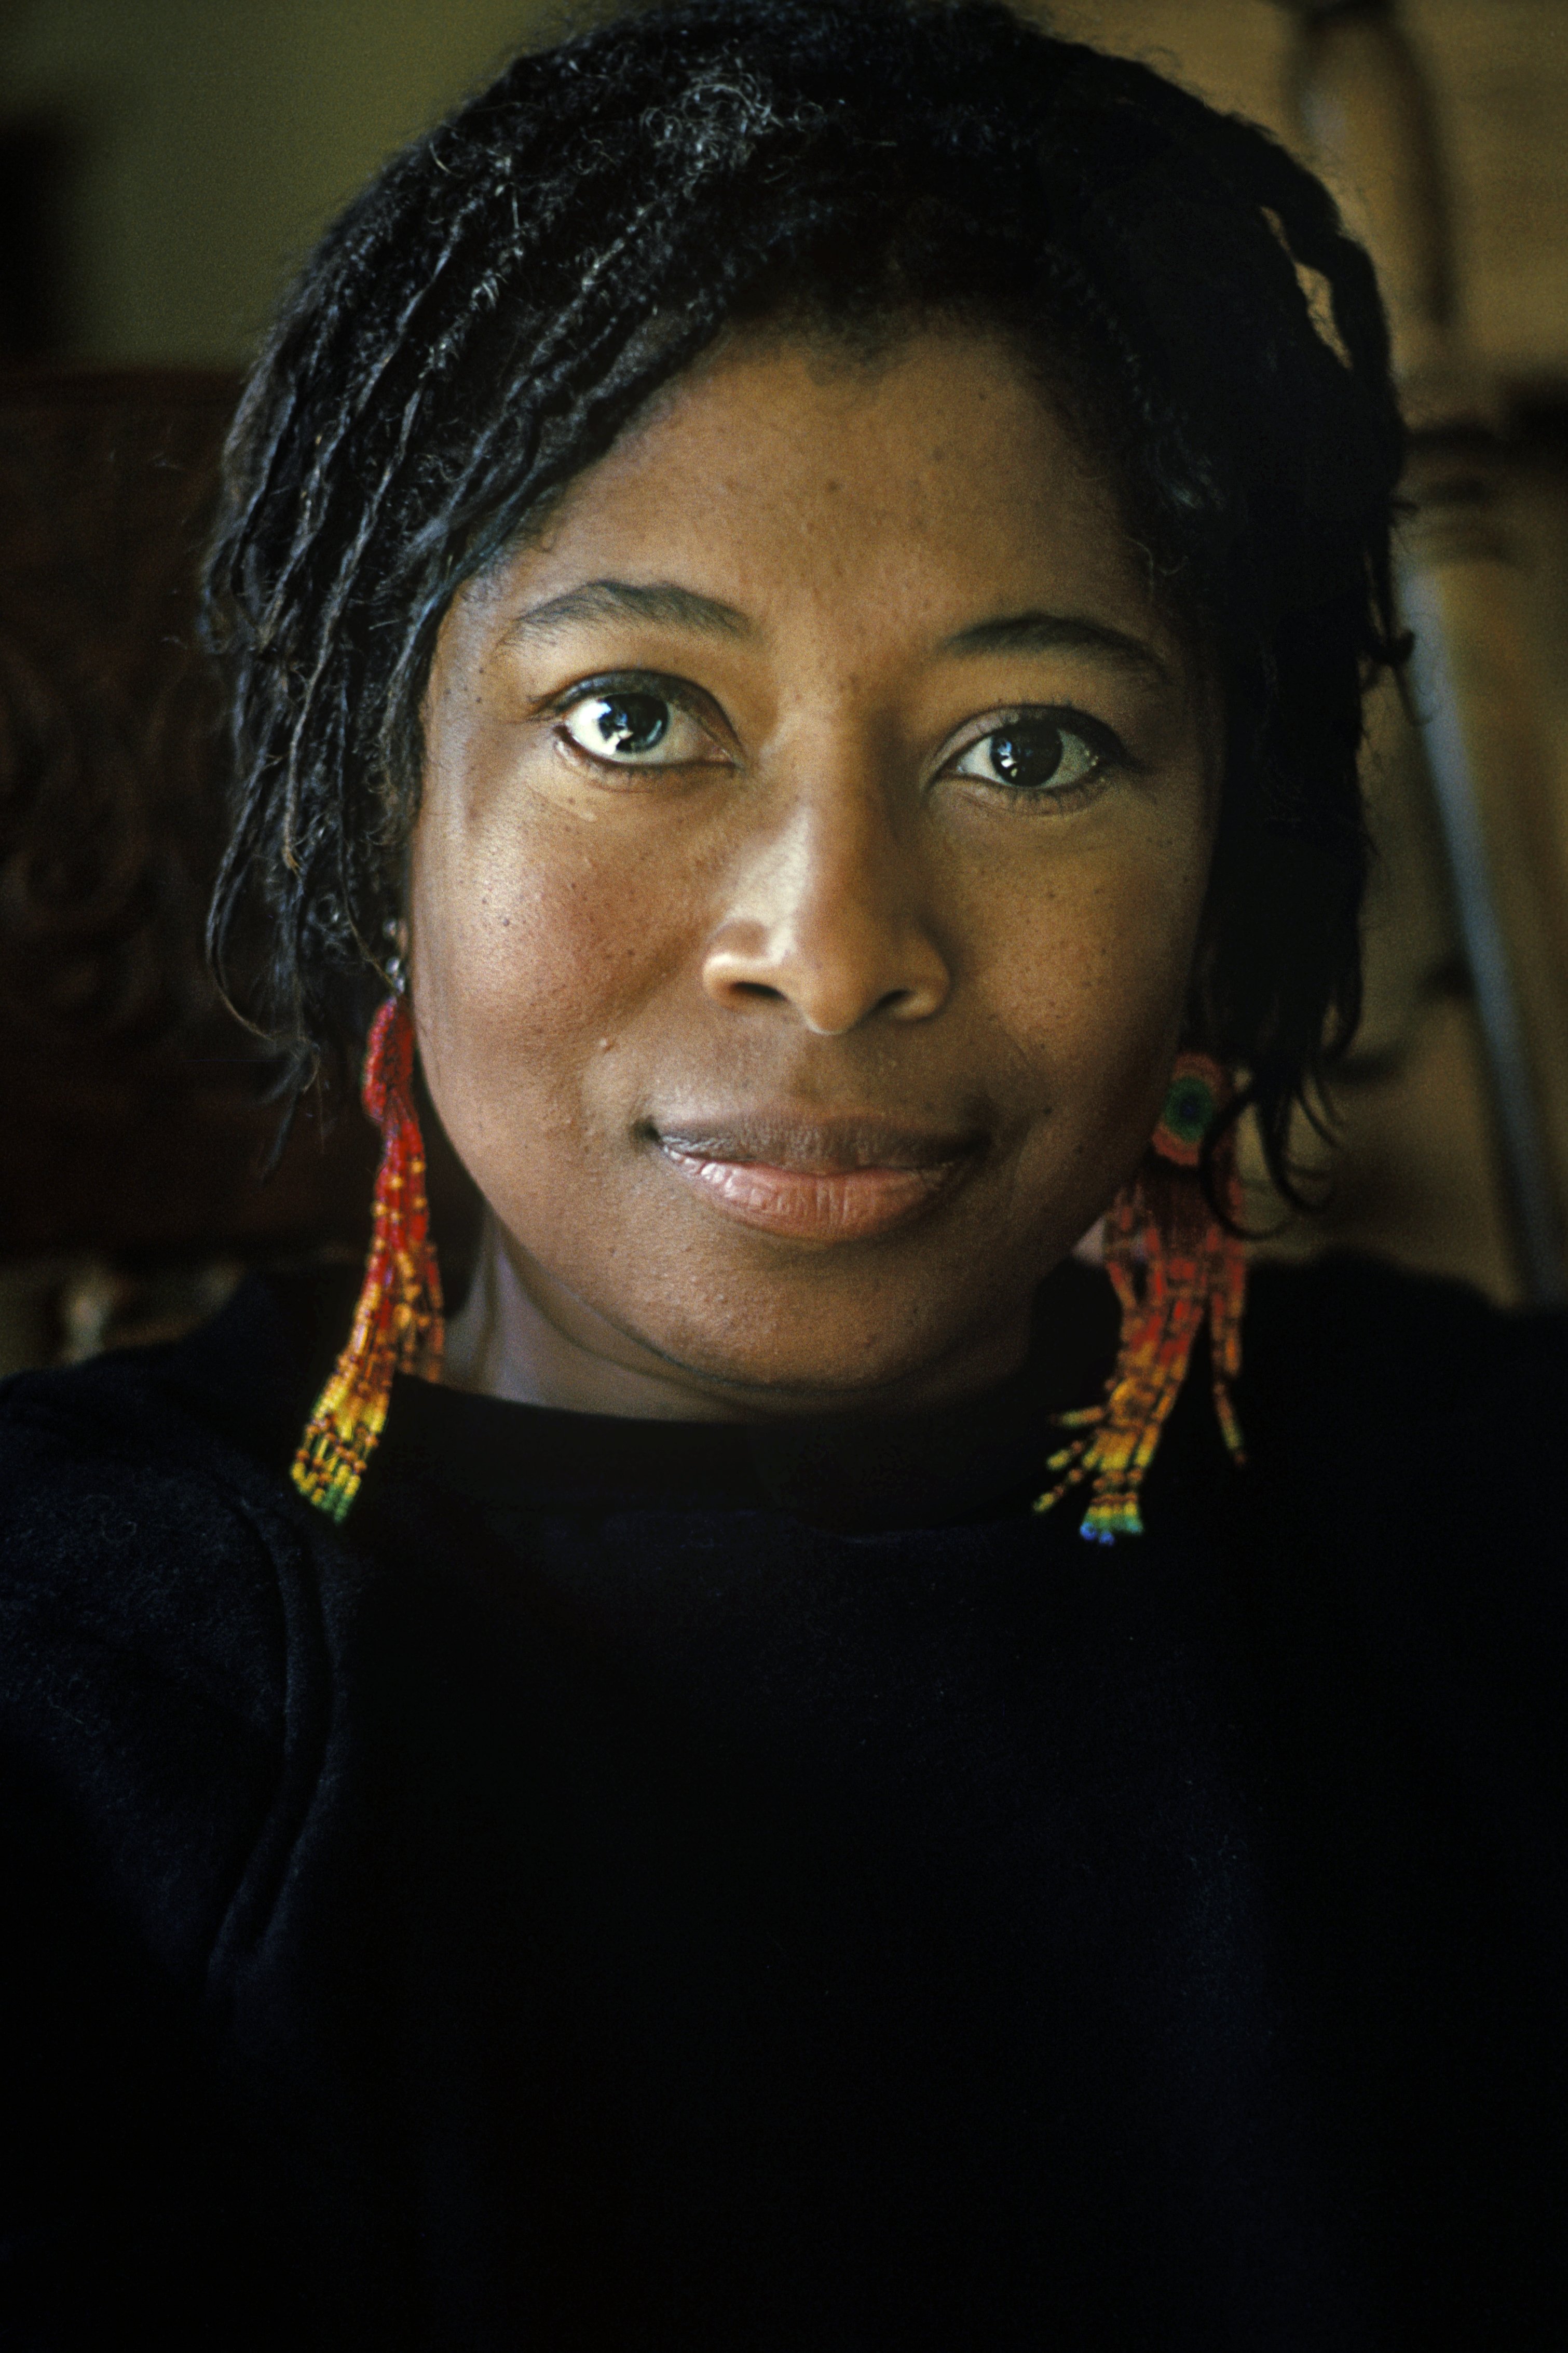 Alice Walker , Best known for her novel 'The Color Purple', poses for portrait at home in San Francisco in January, 1985 | Photo: Getty Images